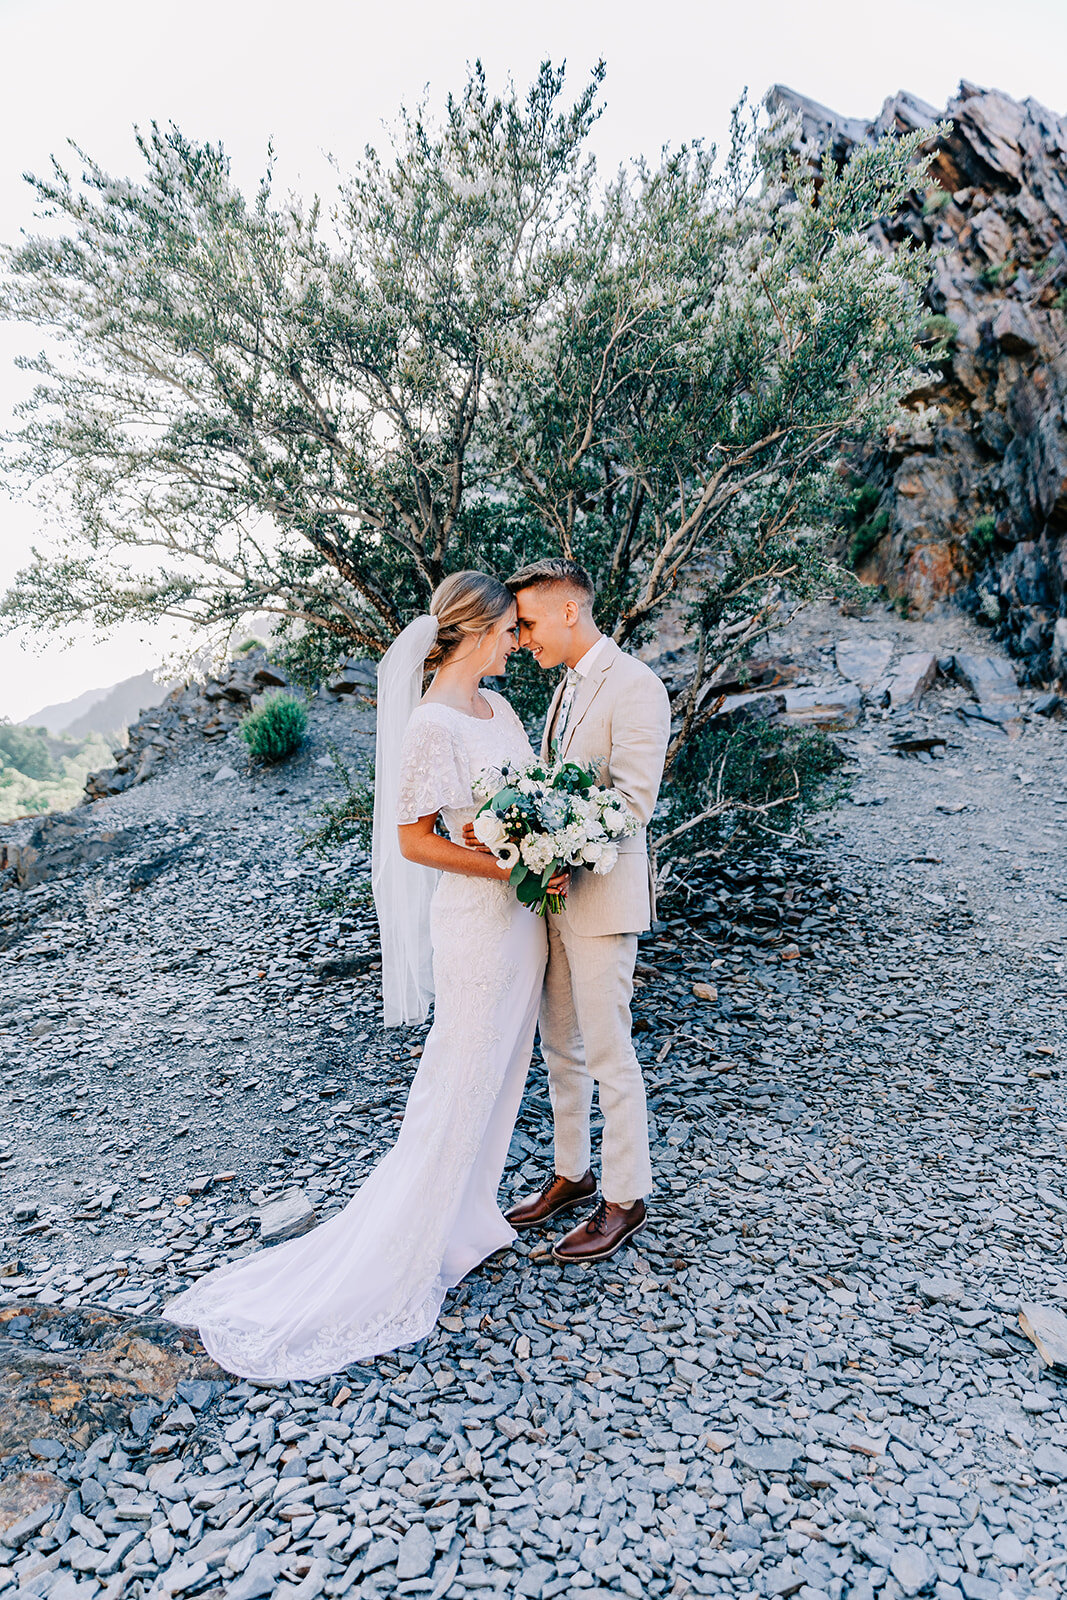  A loving couple staring into each others eyes in a beautiful formal wedding photo shoot by Bella Alder Photography. Cottonwood Canyon wedding photo shoot inspiration summer wedding inspiration professional Utah wedding photographer Bella Alder Photo